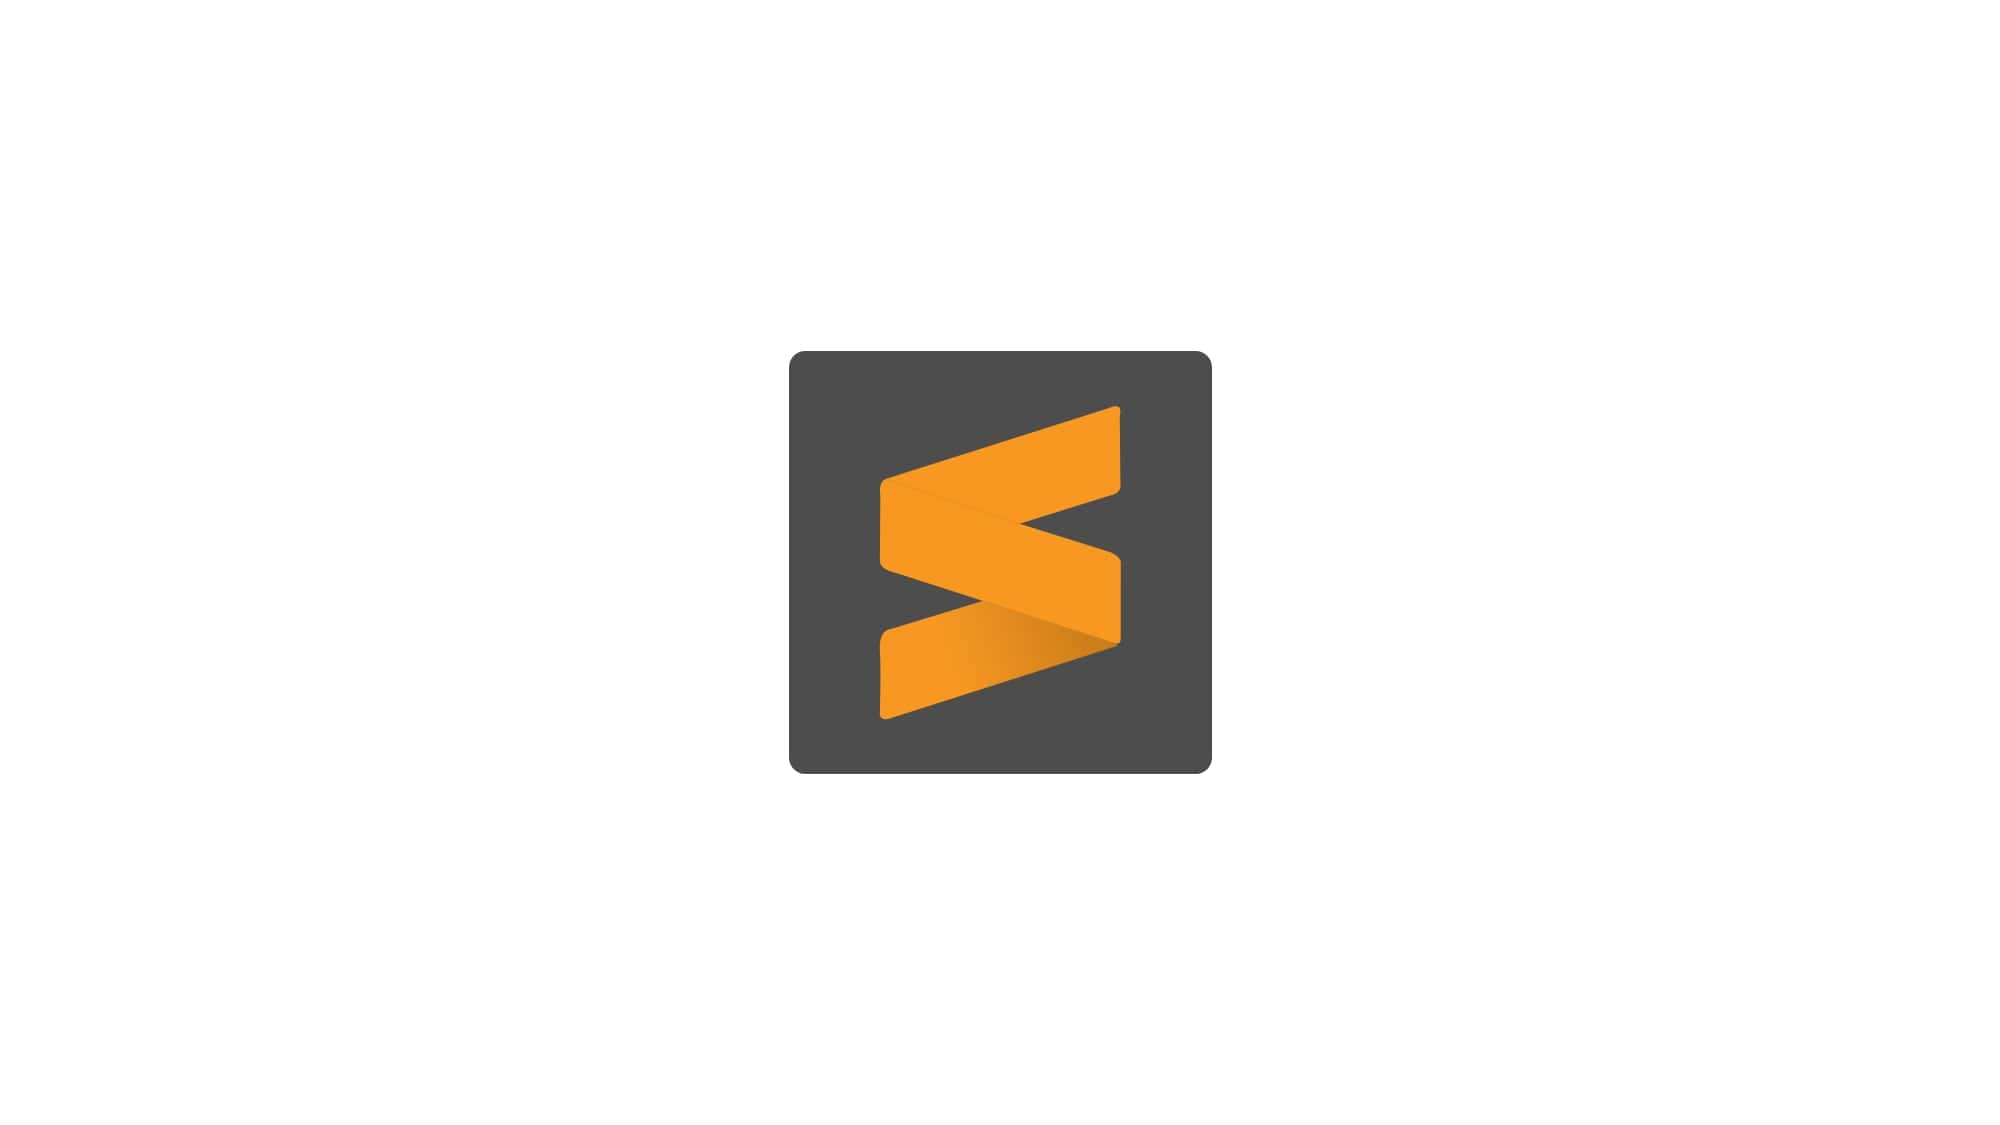 Https www txt. Sublime text. Sublime text 3. Sublime text картинки. Значок Sublime text.